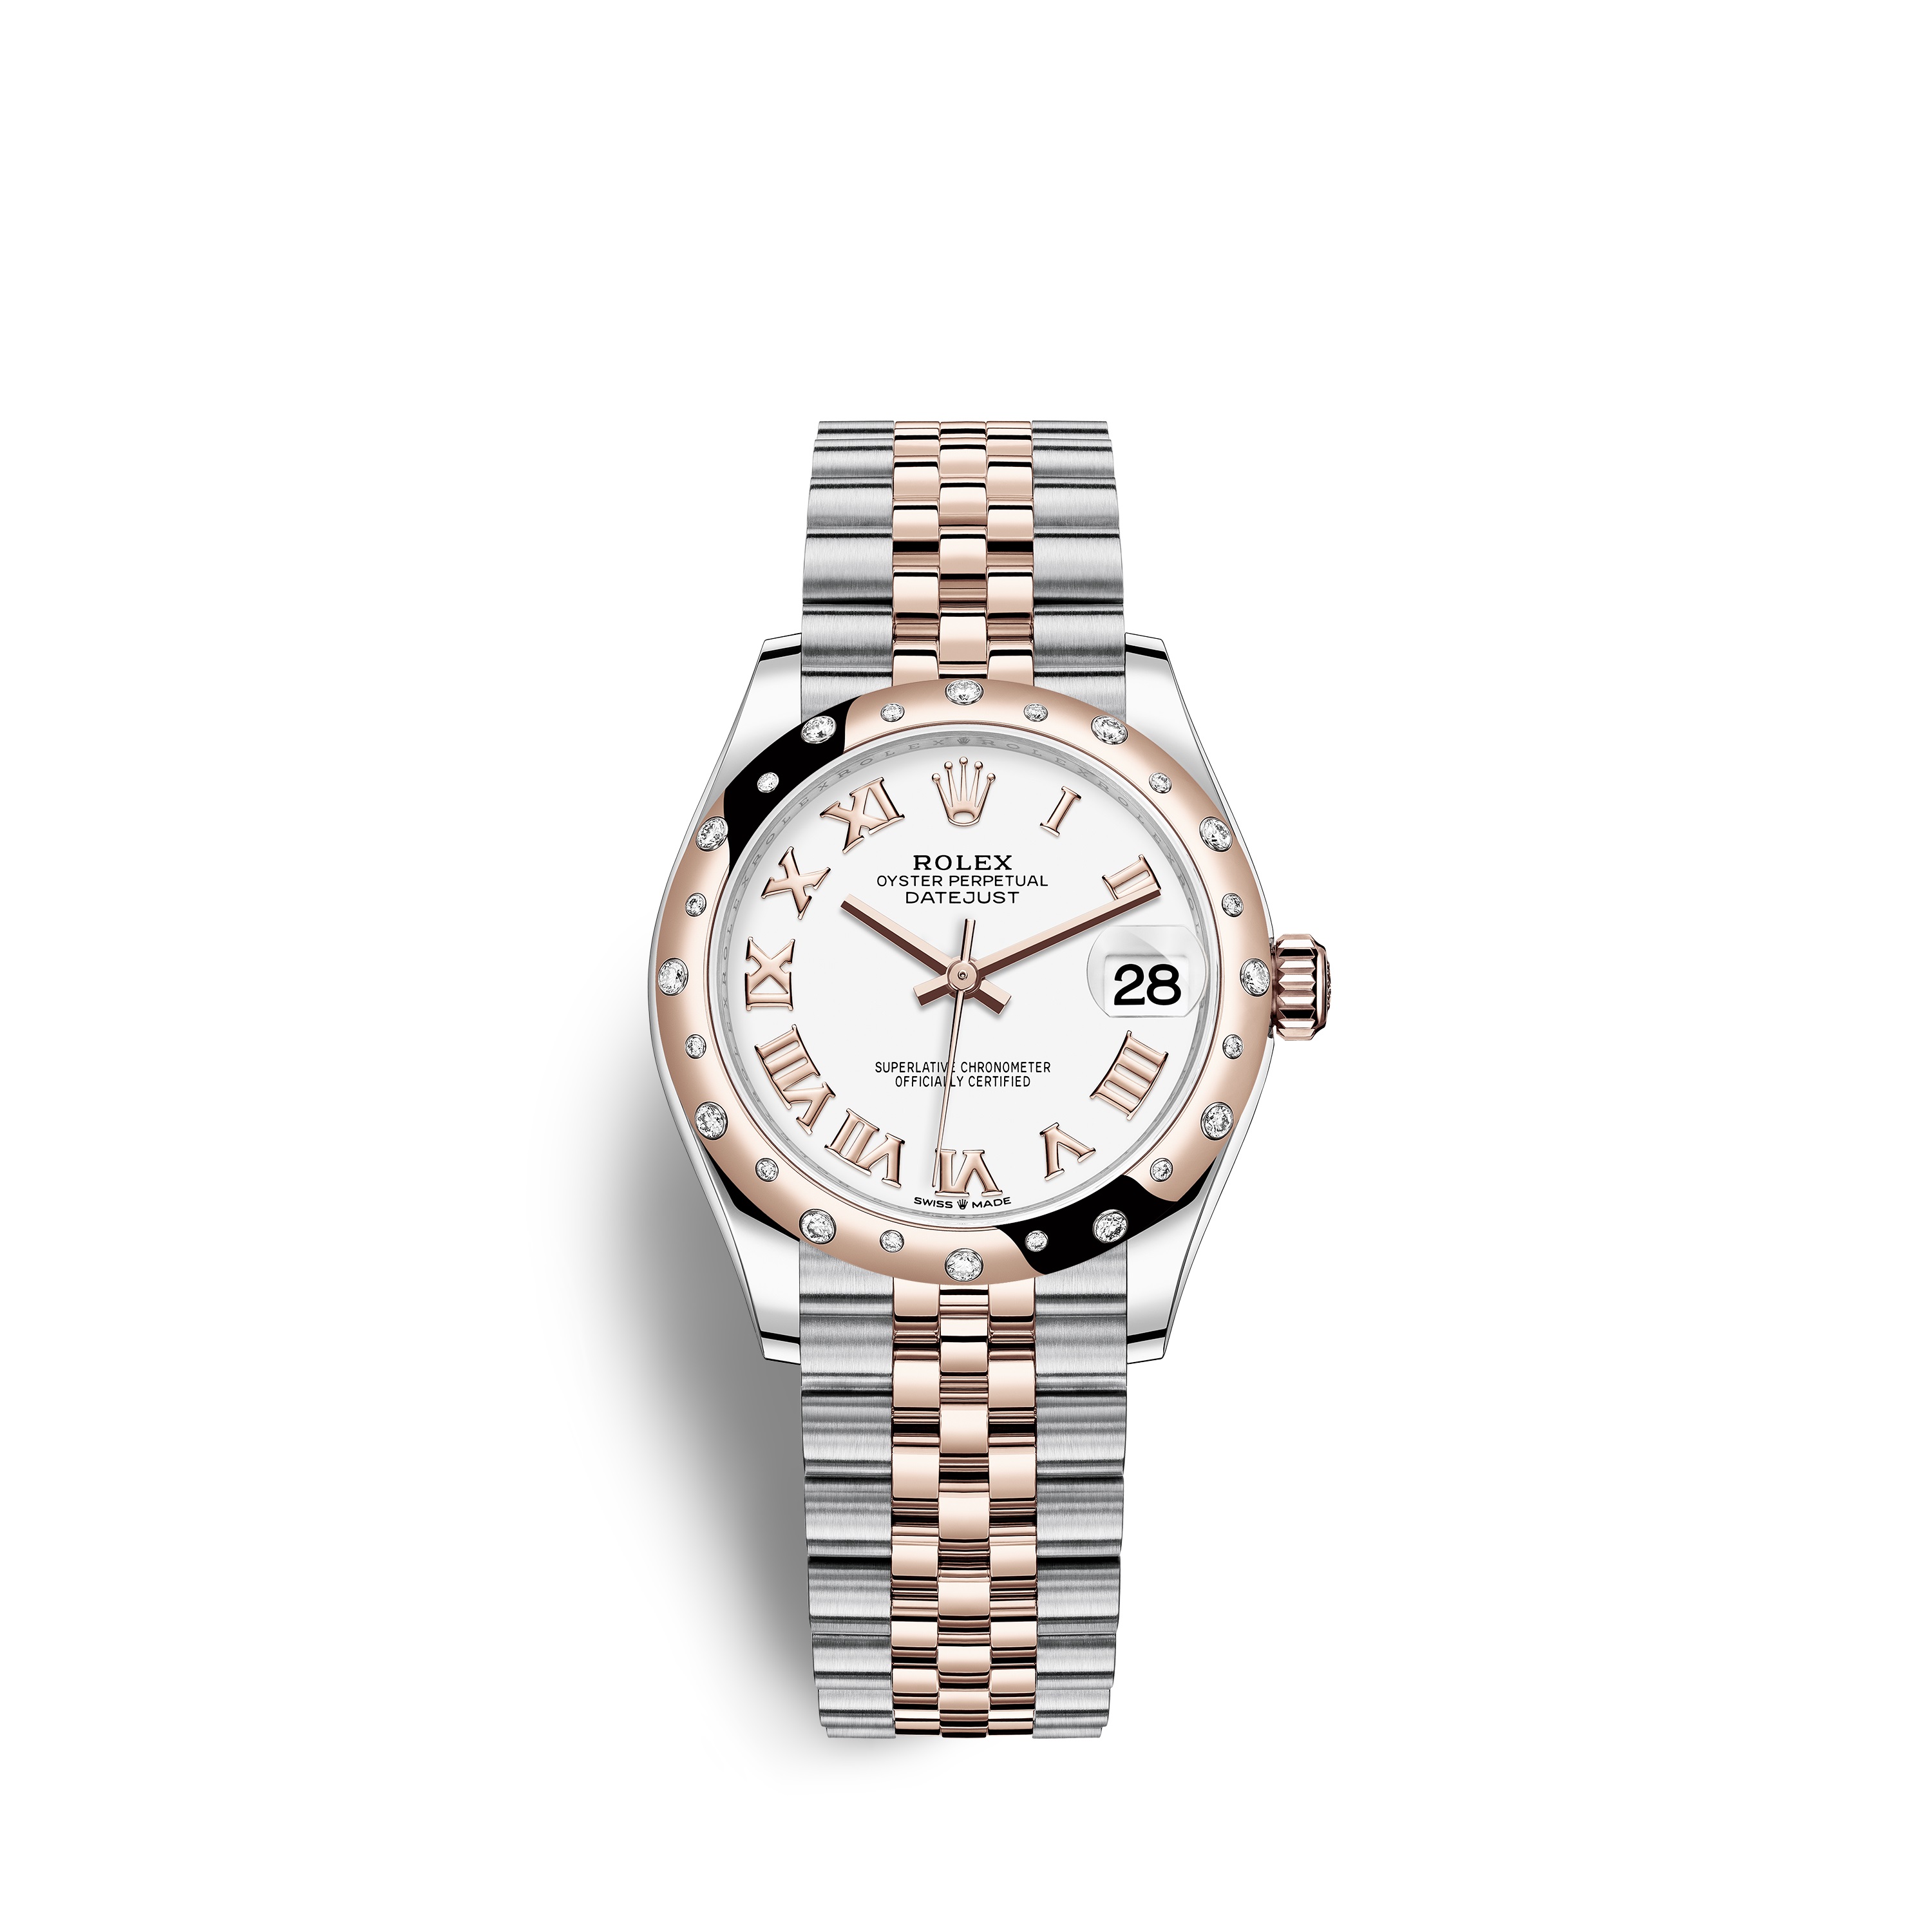 Datejust 31 278341RBR Rose Gold, Stainless Steel & Diamonds Watch (White)